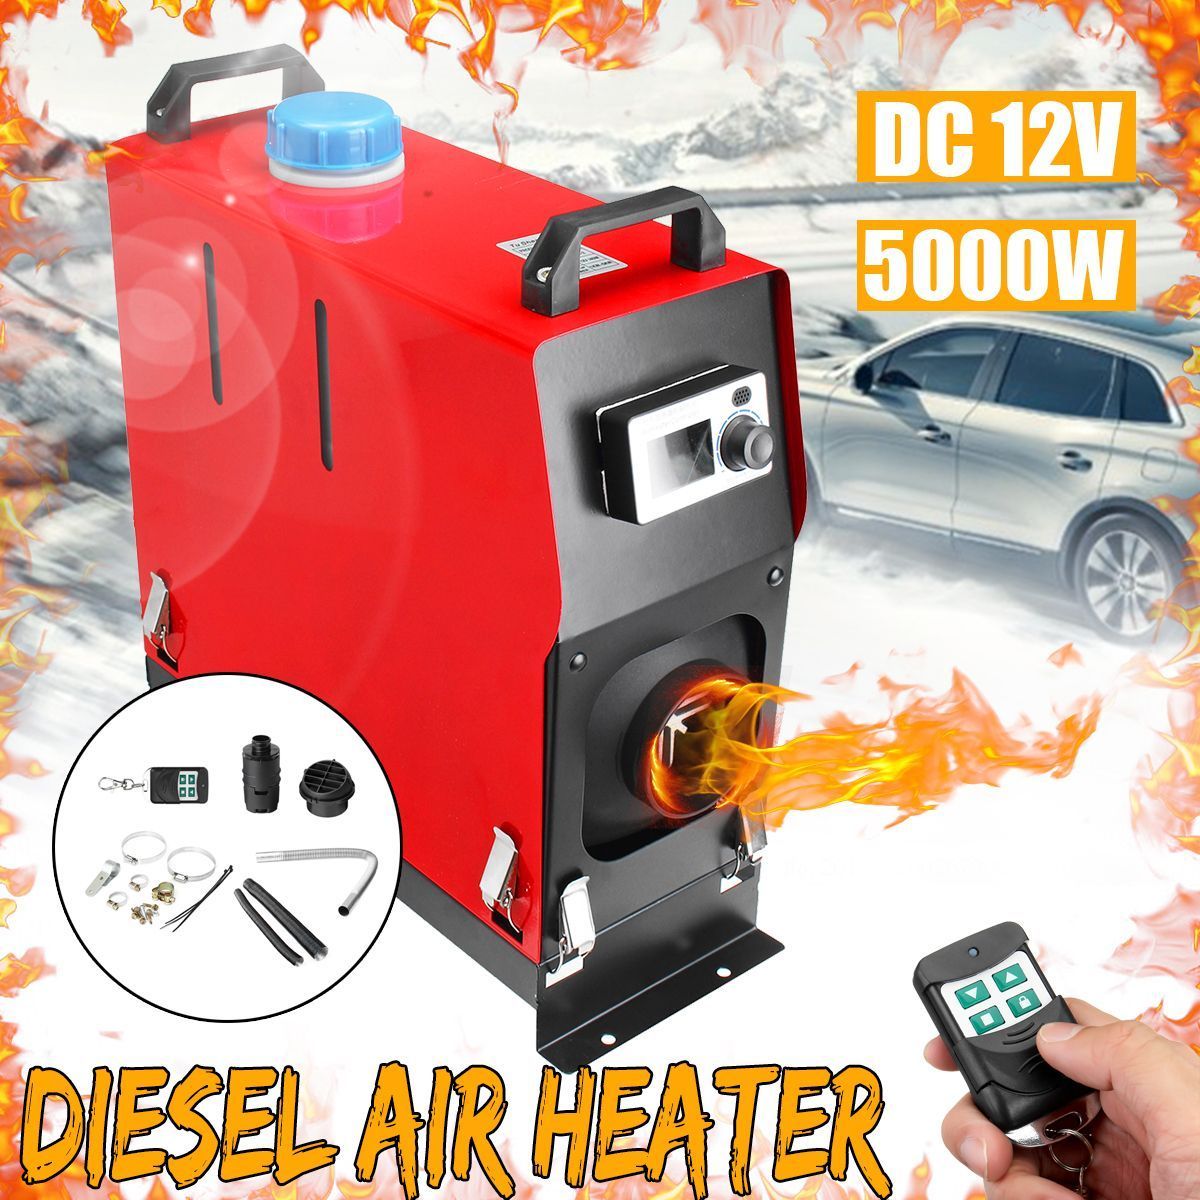 12V-5KW-Diesel-Air-Heater-Parking-Heater-All-In-One-LCD-Display-with-Remote-control-1405505